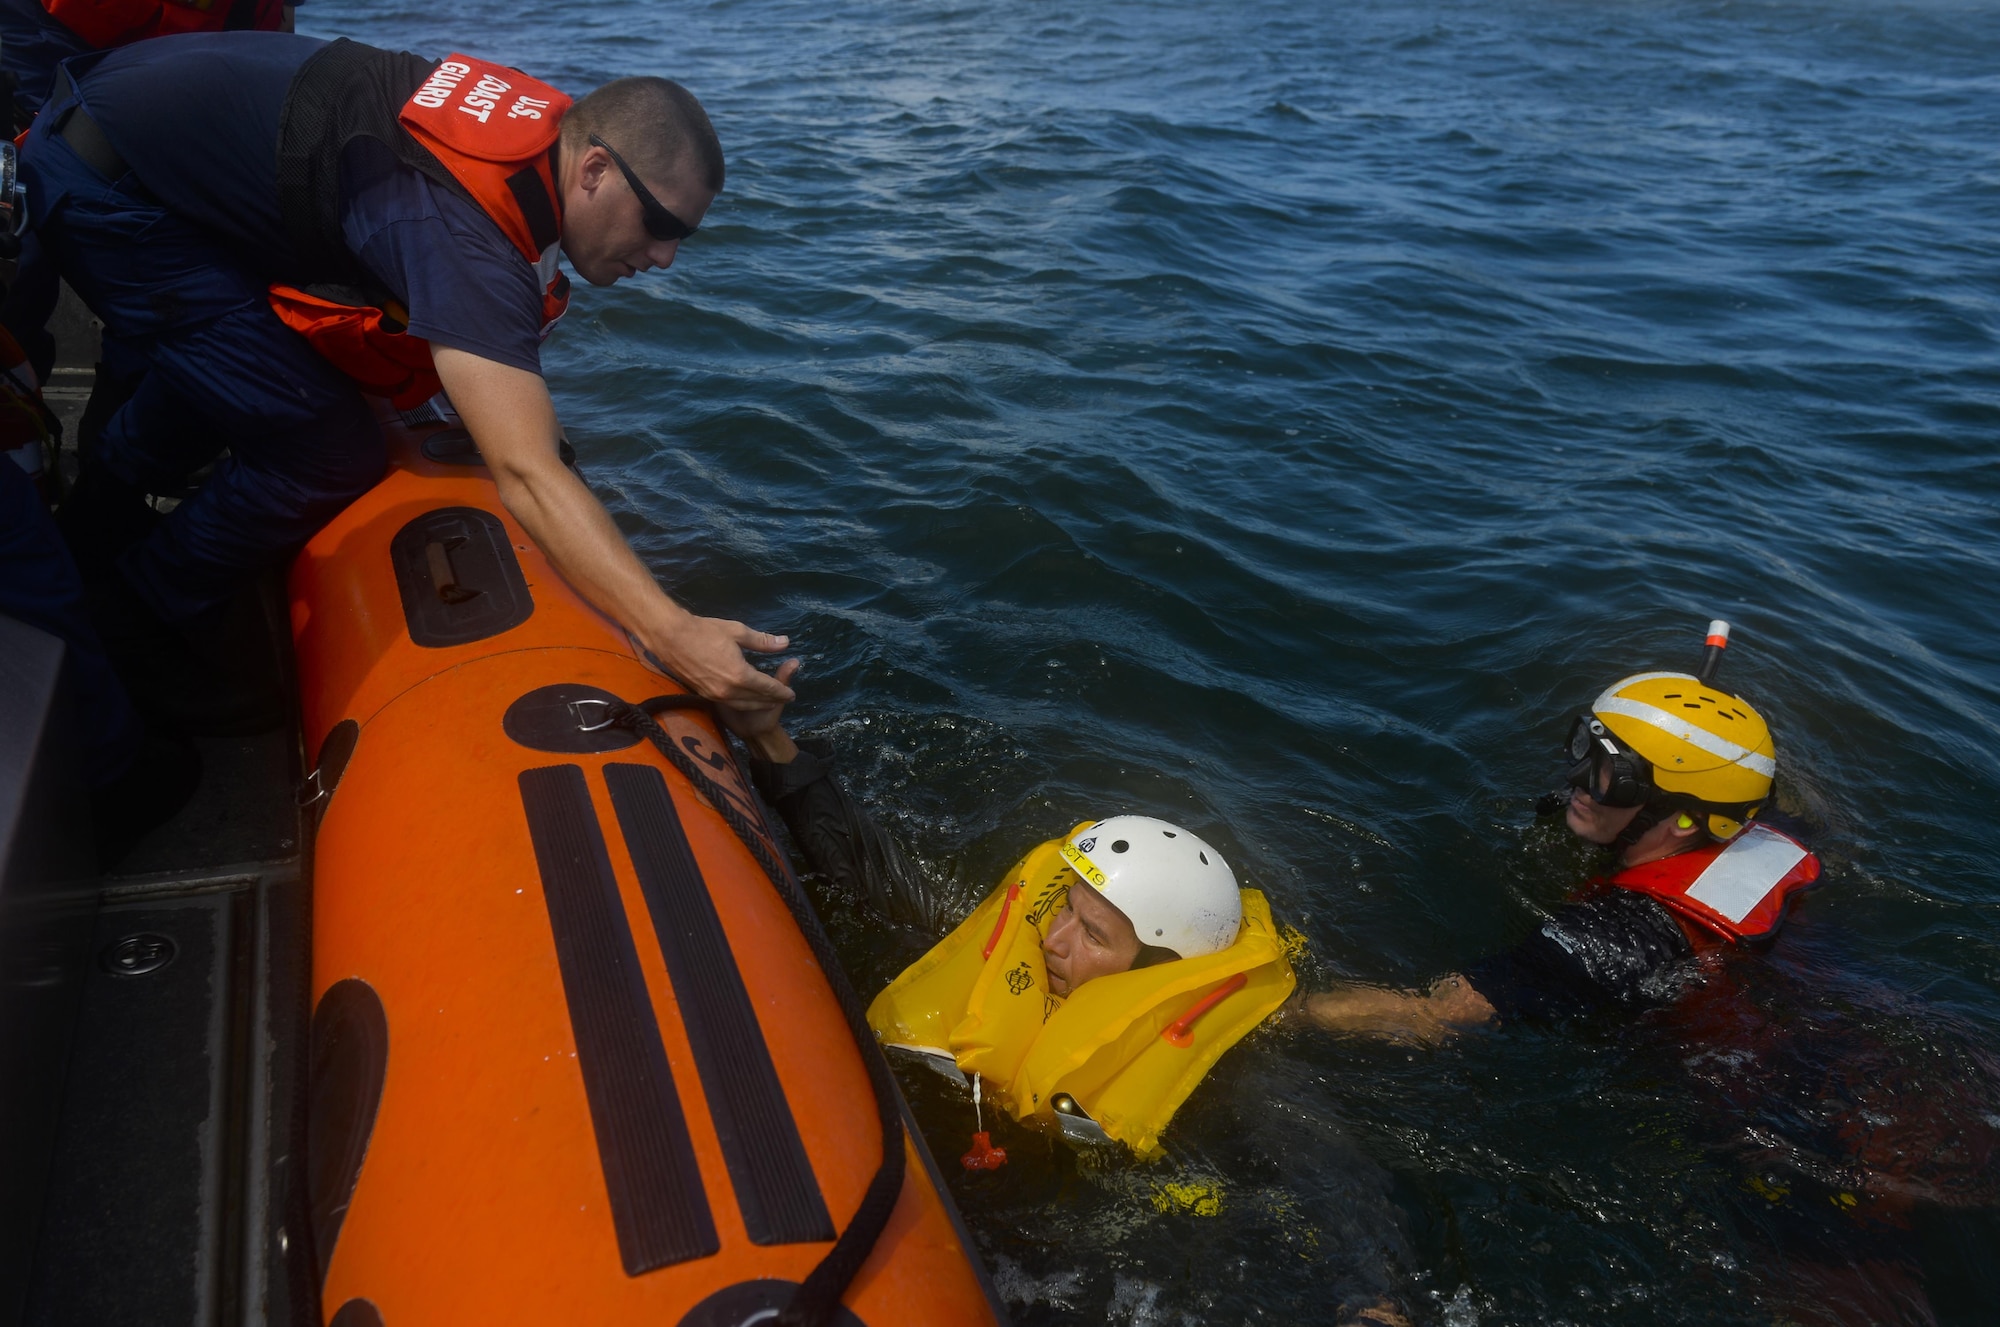 U.S. Coast Guard Sector/Air Station Corpus Christi assists a 433rd Airlift Wing pilot during water survival training Sept. 17, 2016, in the Gulf of Mexico. Pilots and aircrew personnel spent the day learning techniques they will need after egressing from an aircraft, such as donning life vests, using MK 12 and MK 13 Day/Night ignition flares and getting into a 25-manned life raft and hoisted from a Life Preserver Unit to a hovering MH-65 Dolphin helicopter. (U.S. Air Force photo/Staff Sgt. Matthew Fredericks)